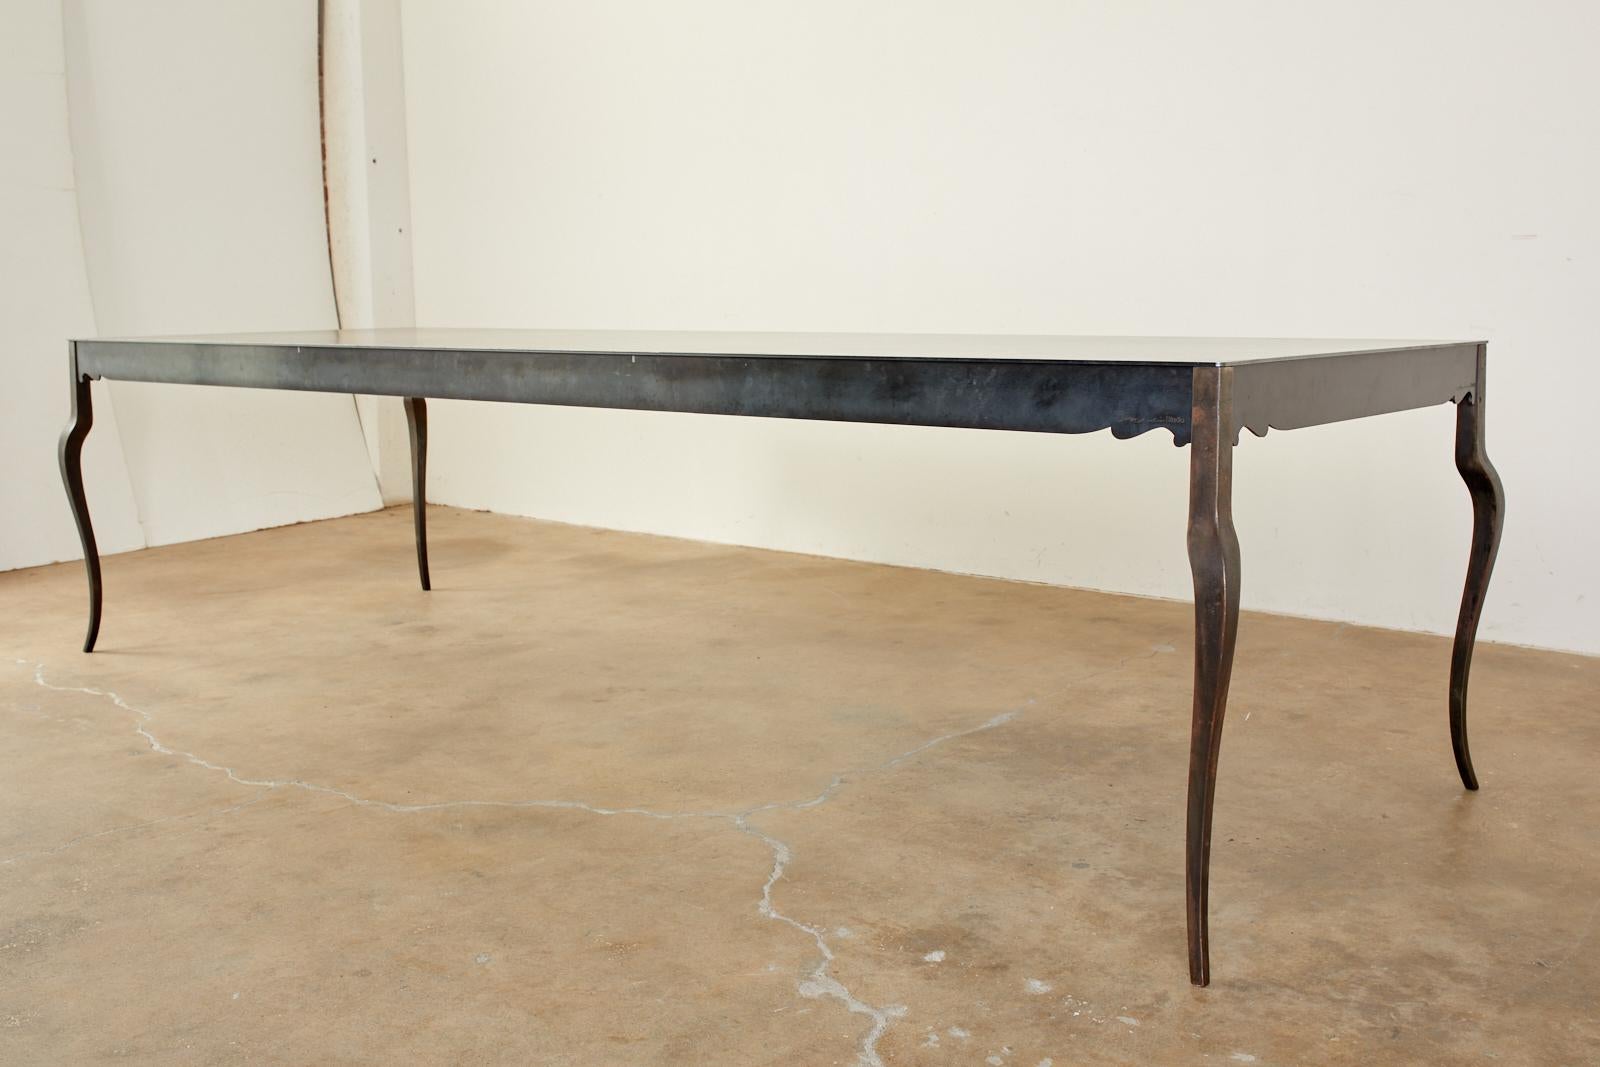 Magnificent modern style handcrafted steel dining table by Gregor Jenkin Studio Cape Town, South Africa. Features a 9.5' foot rectangular top supported by elegant, tapered cabriole legs. The massive table is substantial yet has an impossibly thin